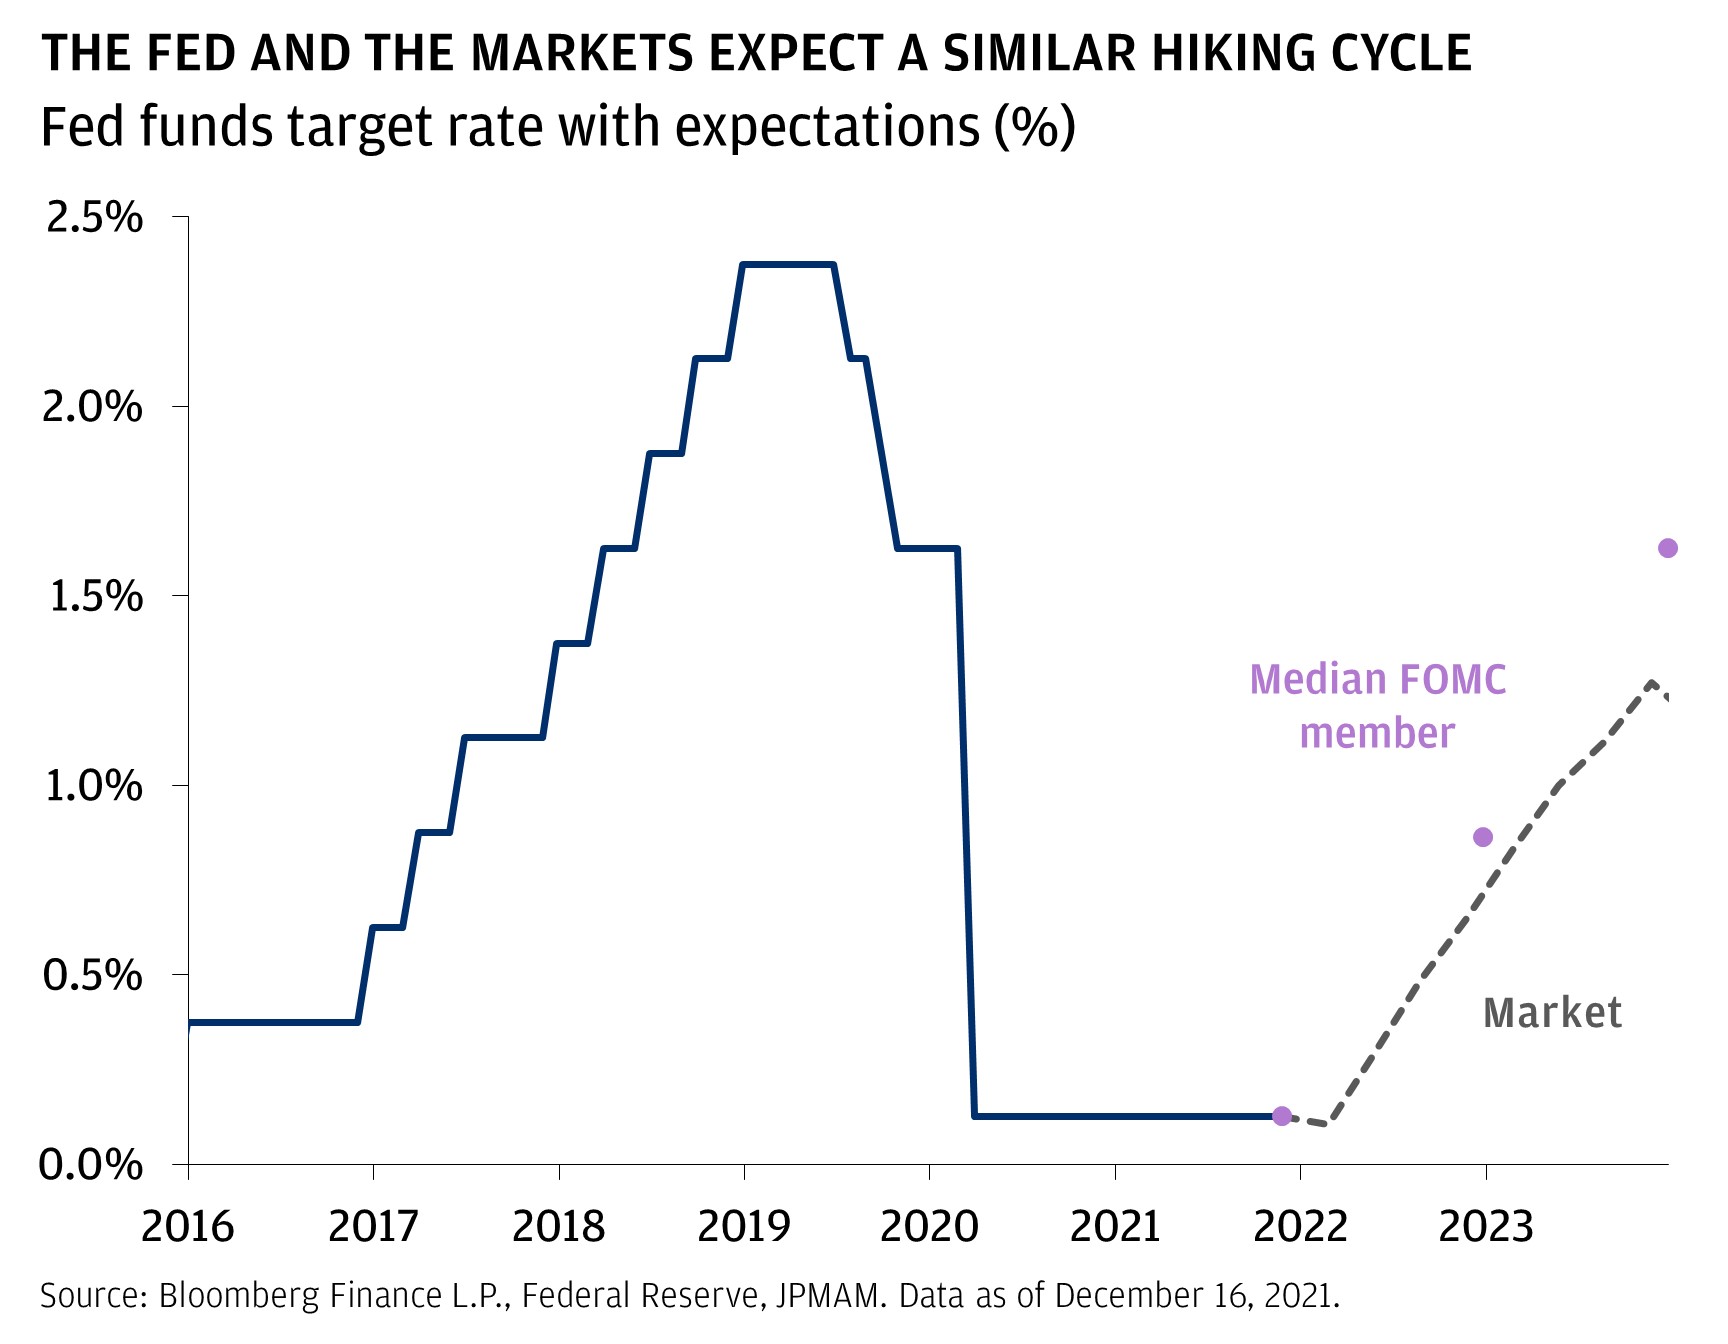 The Fed and the markets expect a similar hiking cycle